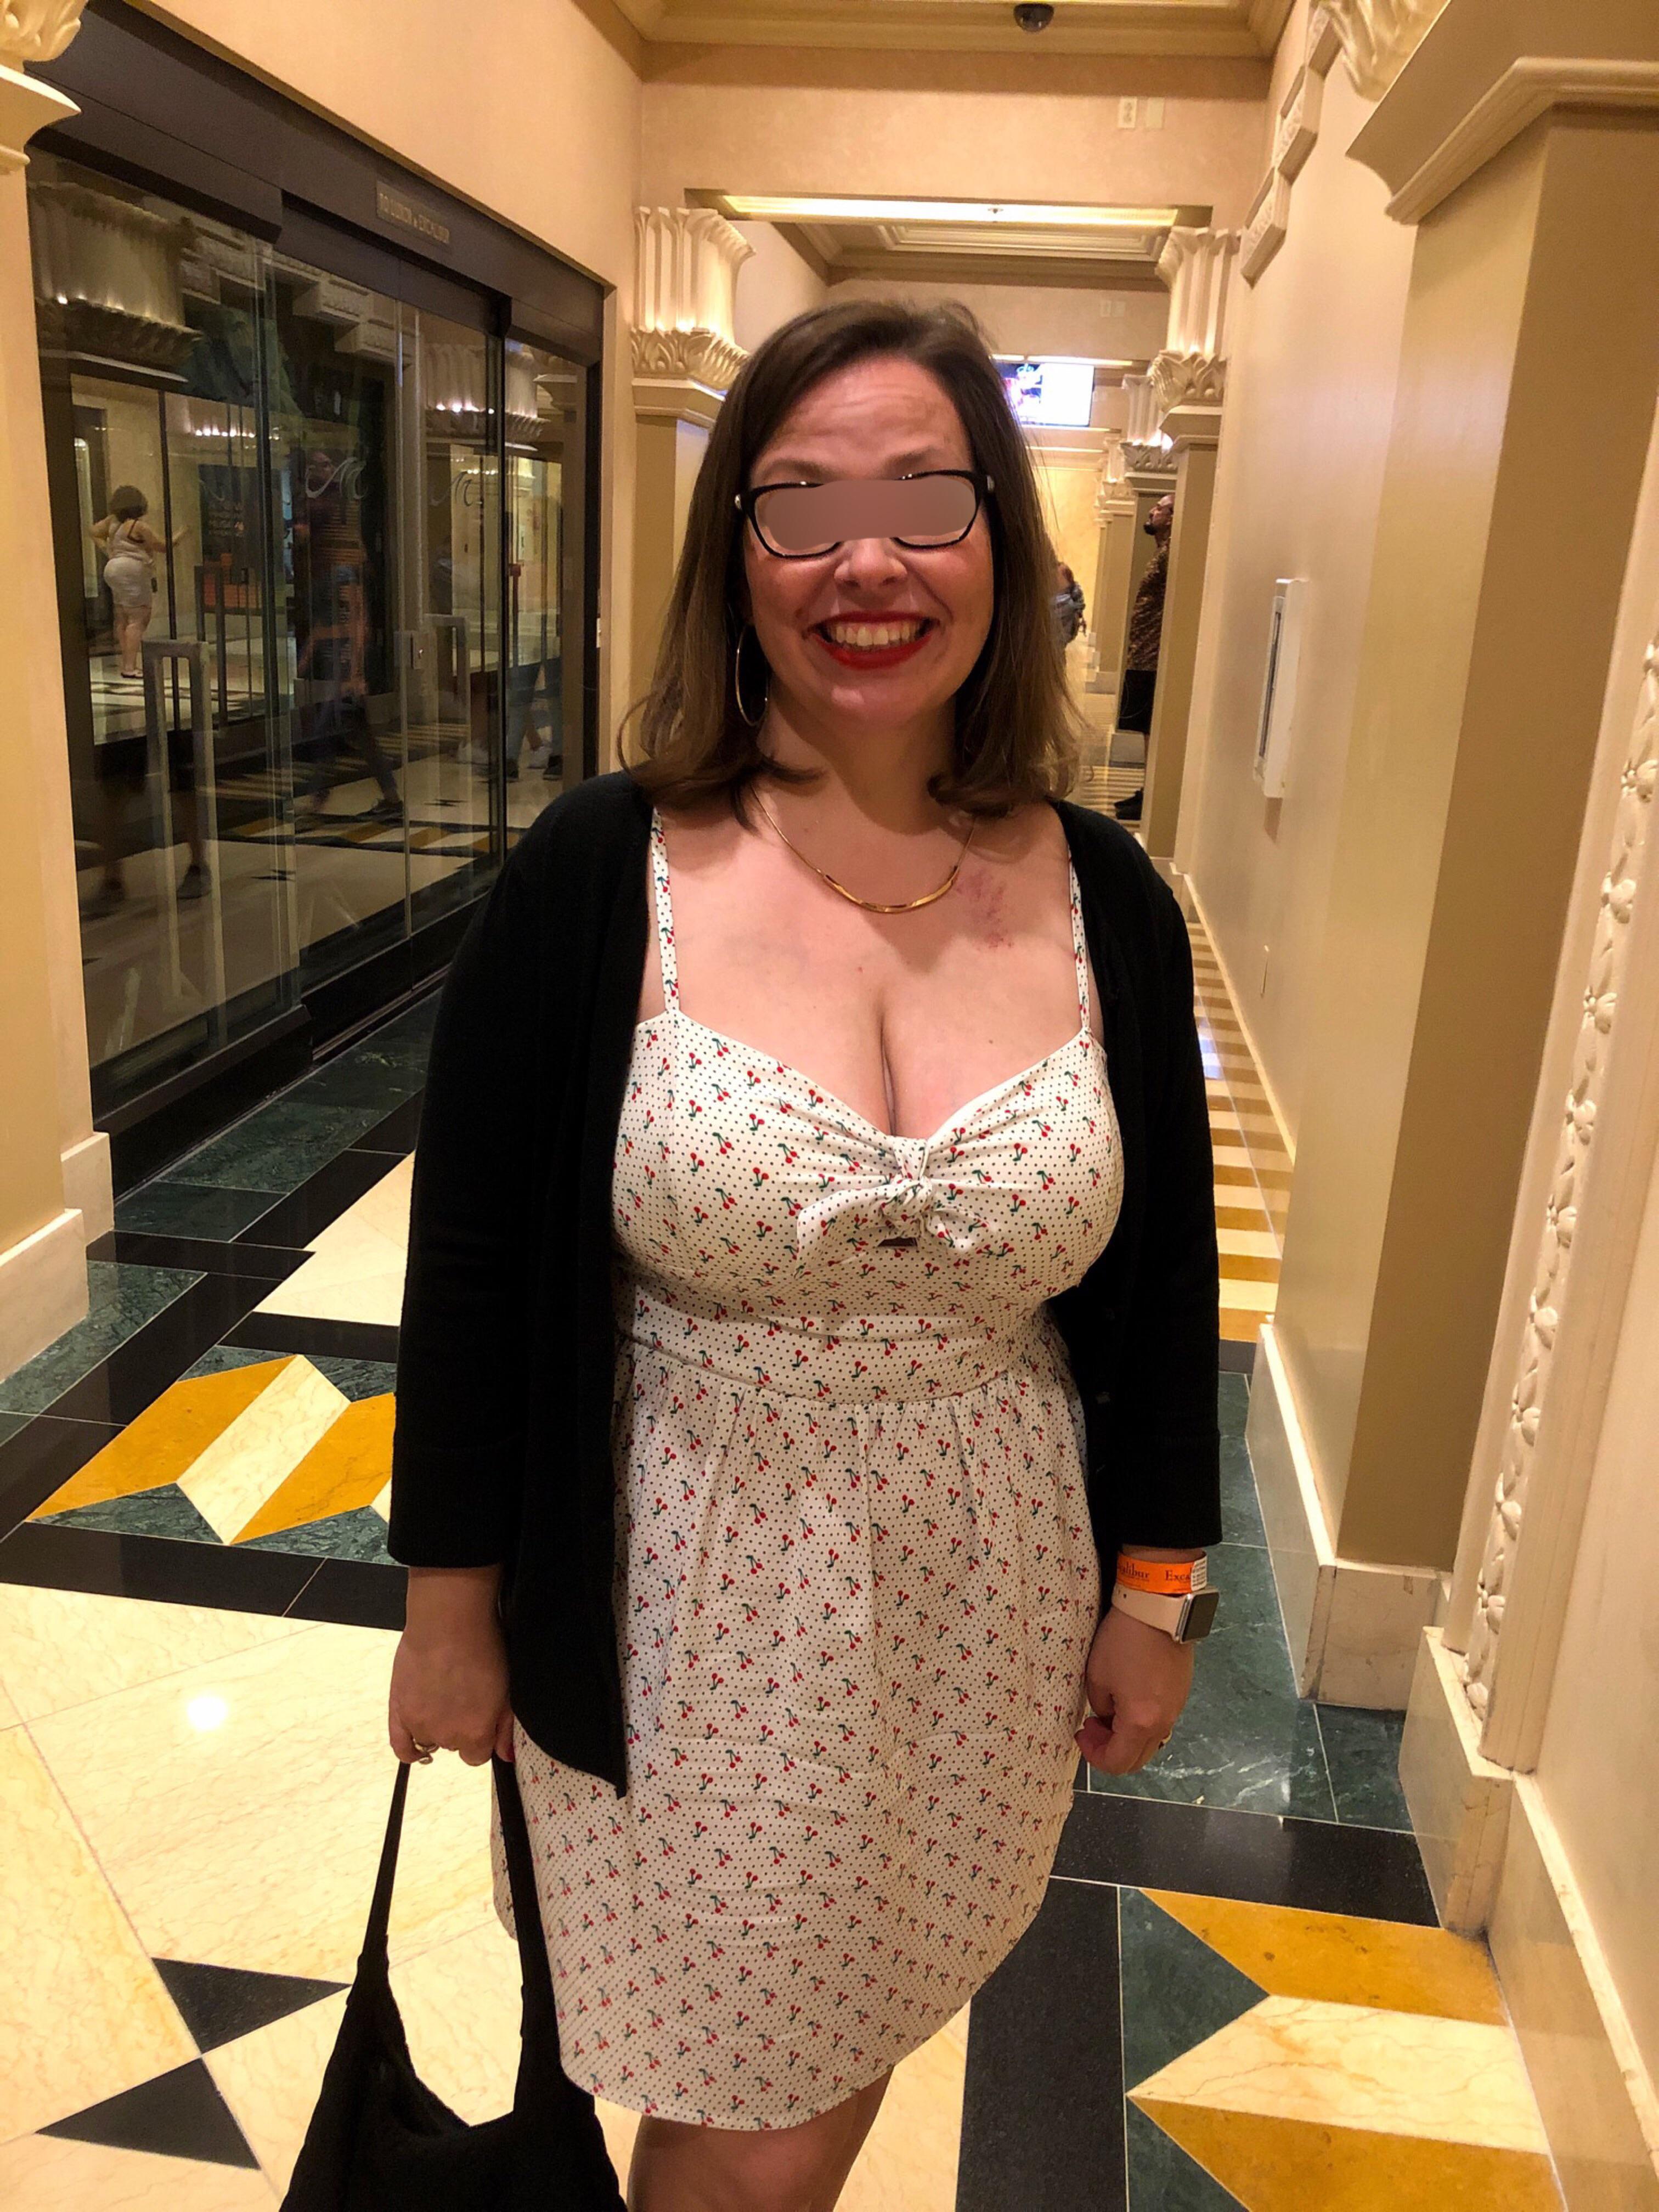 The epitome of a hot mom! [F]irst time in Vegas meant time for the tits to be on full display! Comments and PMs welcome!